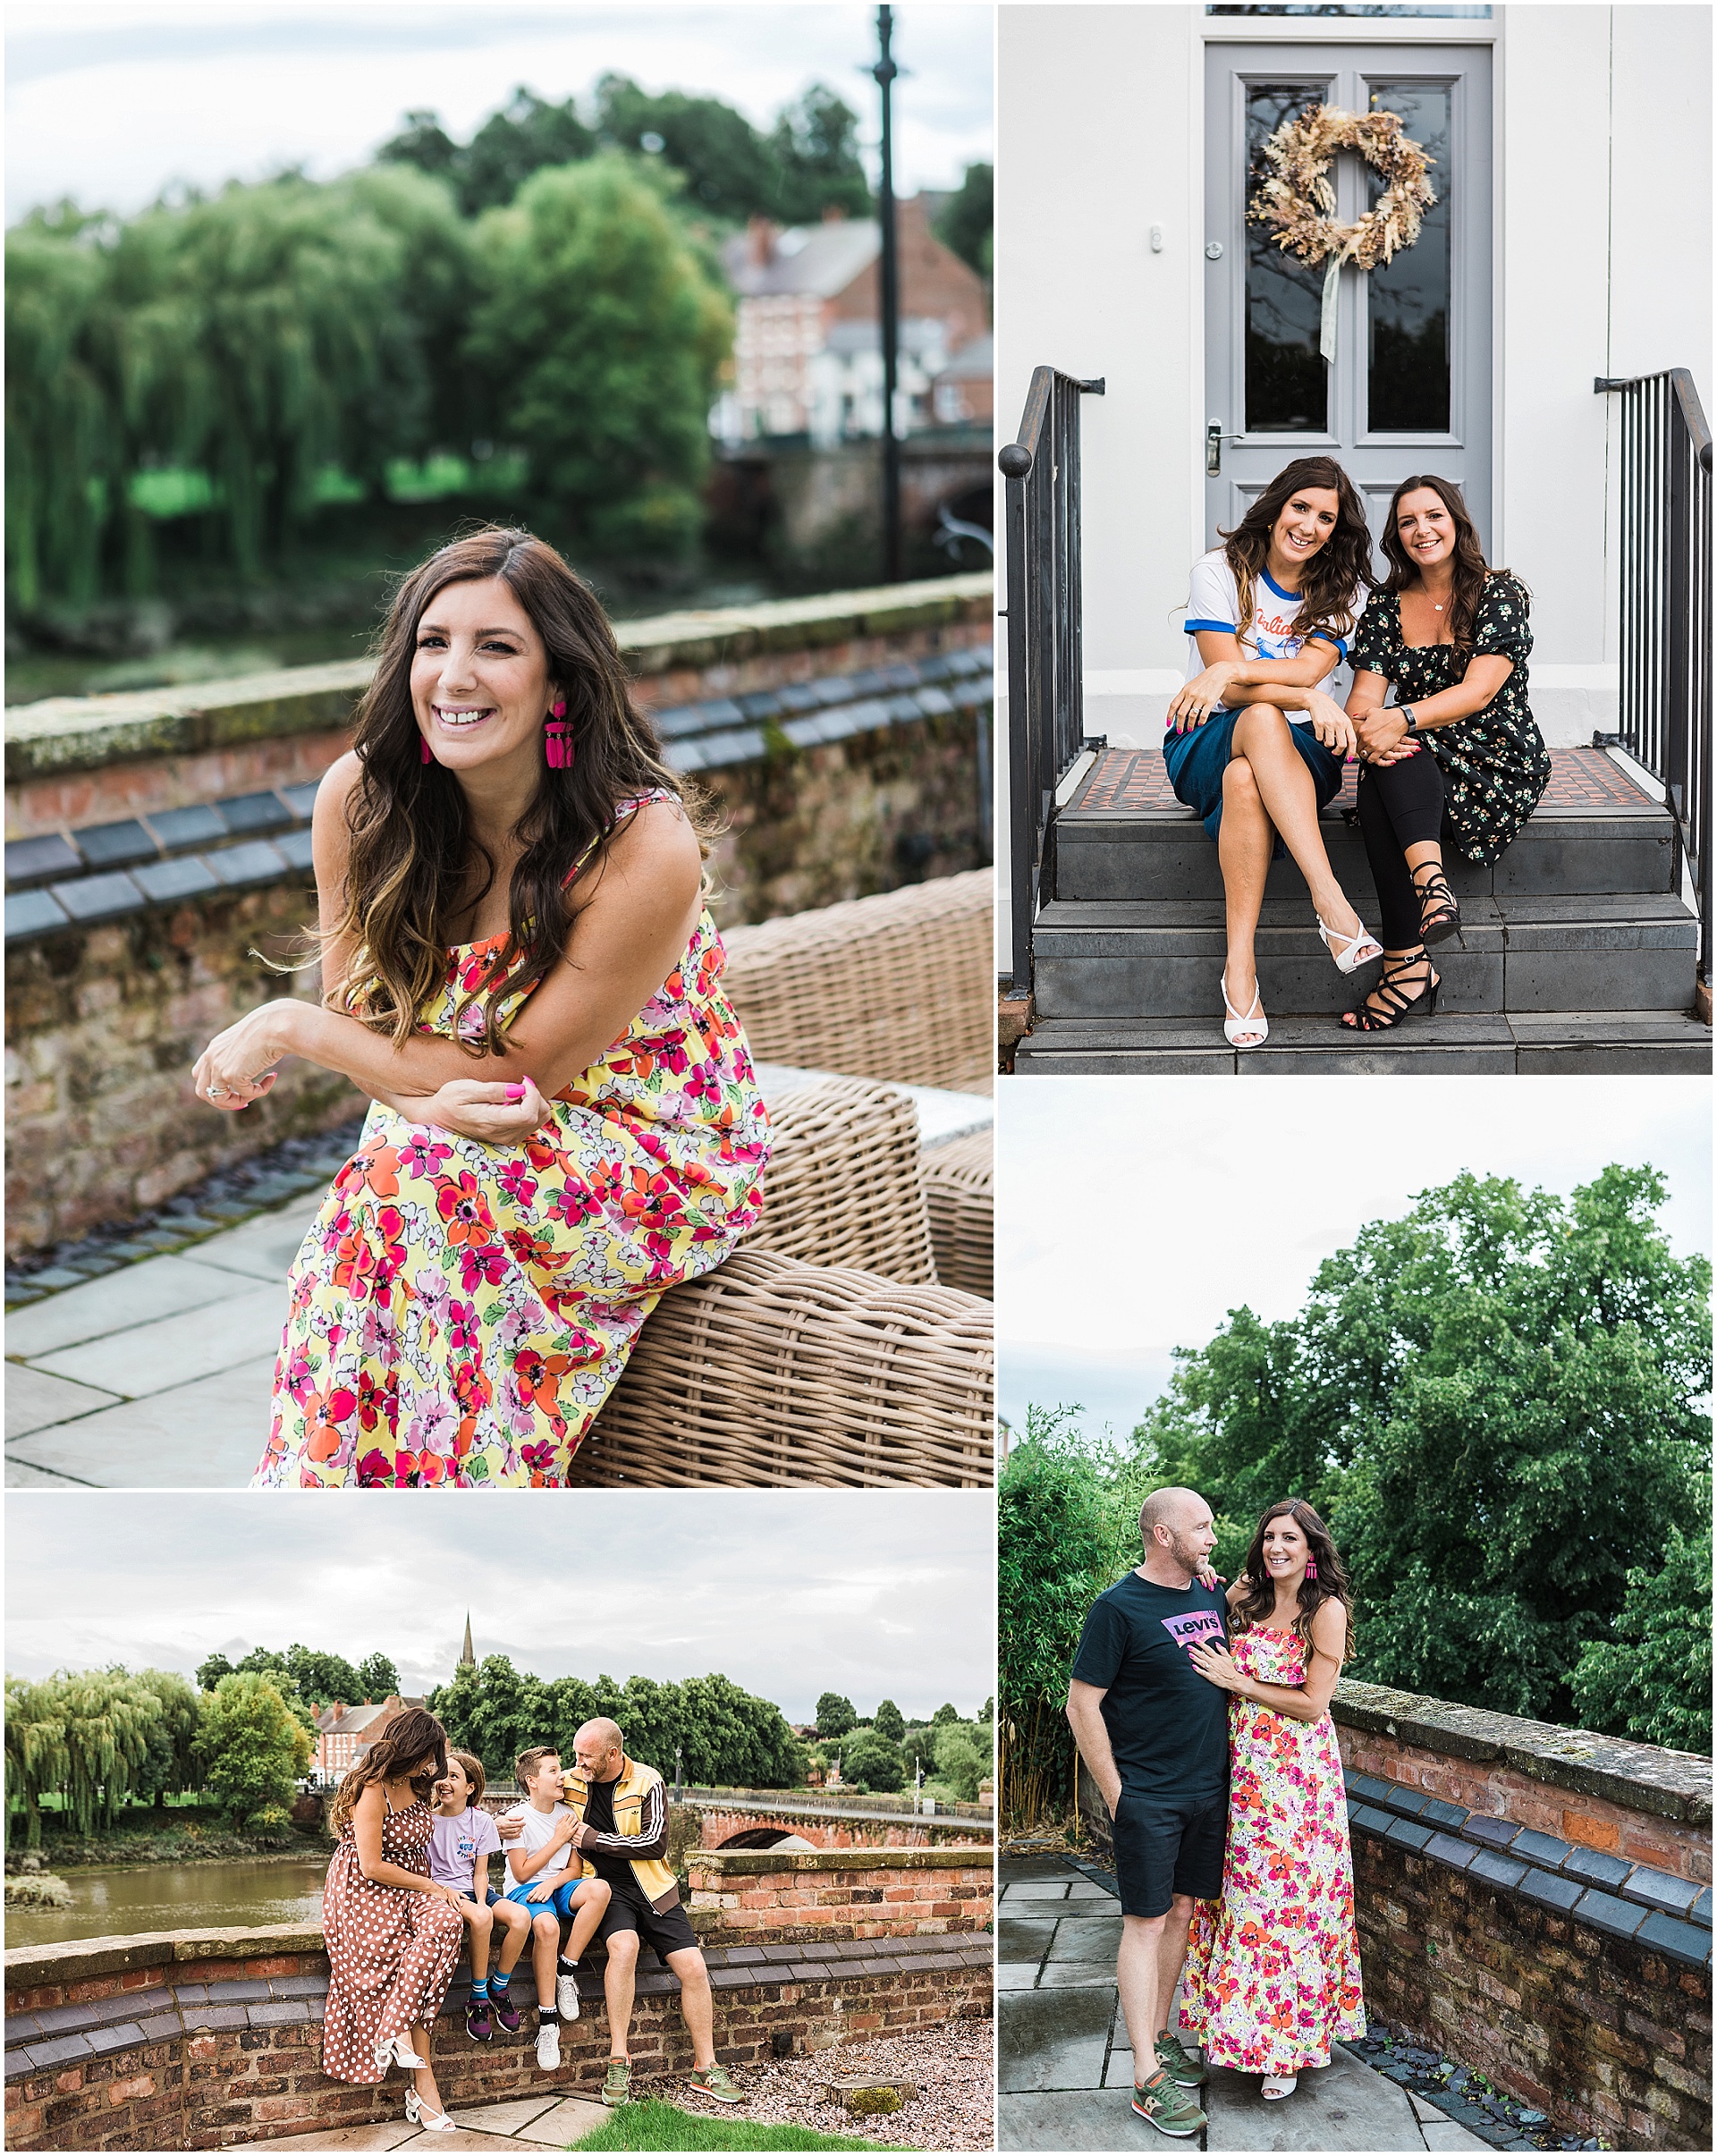 Business strategist Lisa Johnson with her family in Chester. Images by London brand photographer AKP Branding Stories